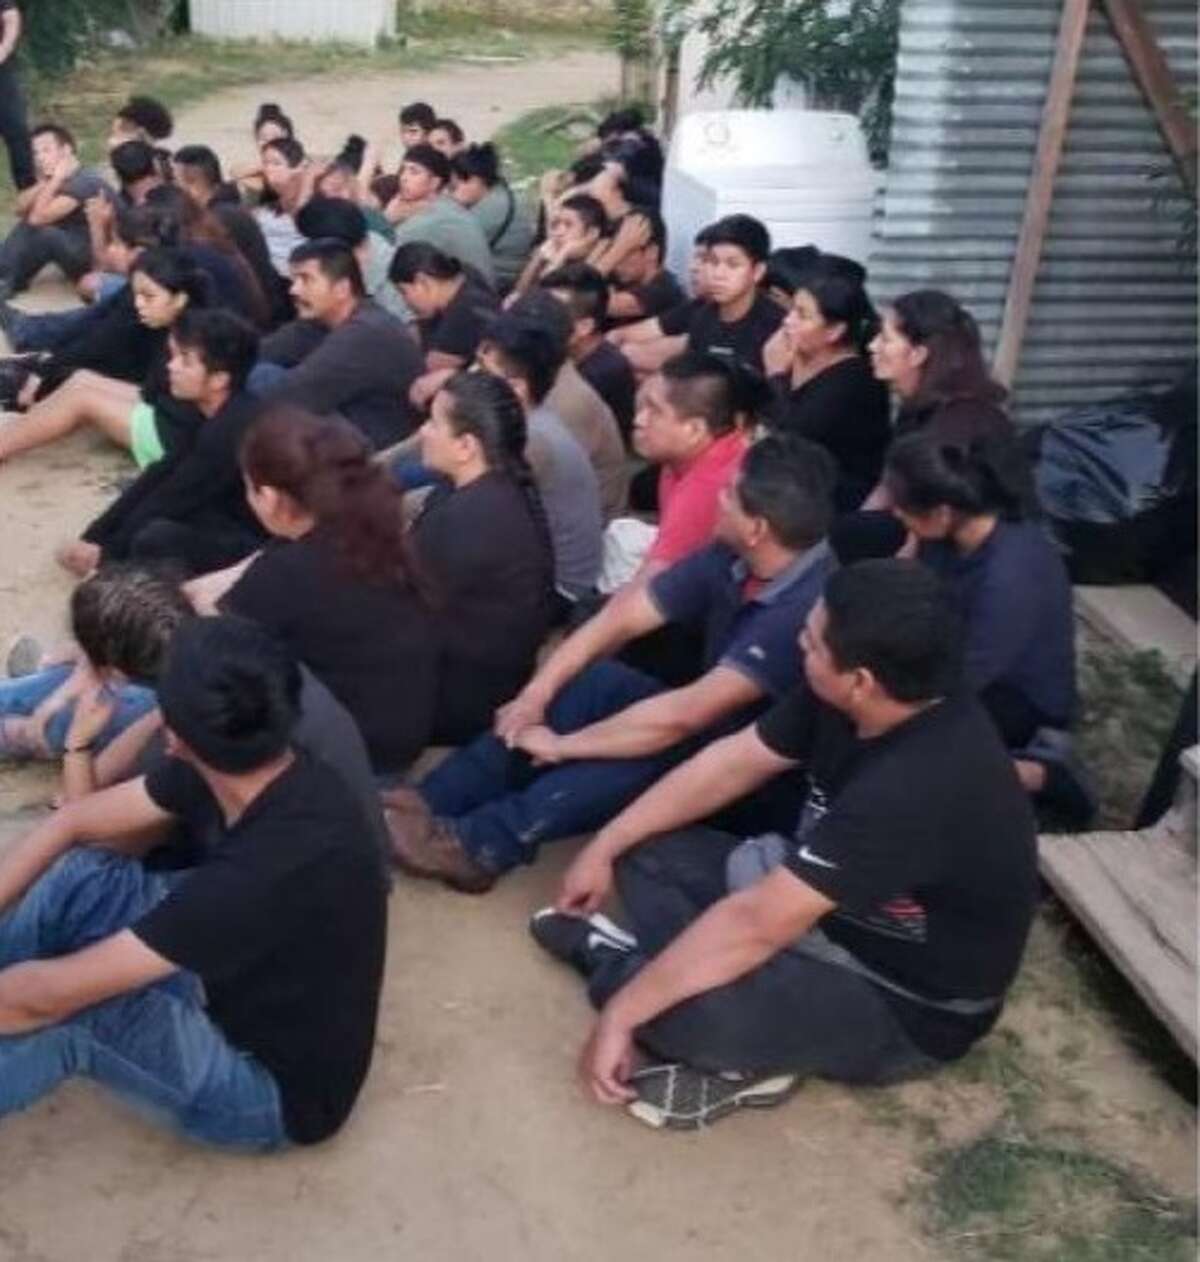 State and federal authorities busted a stash house on Sept. 20 in south Laredo and apprehended 43 migrants.